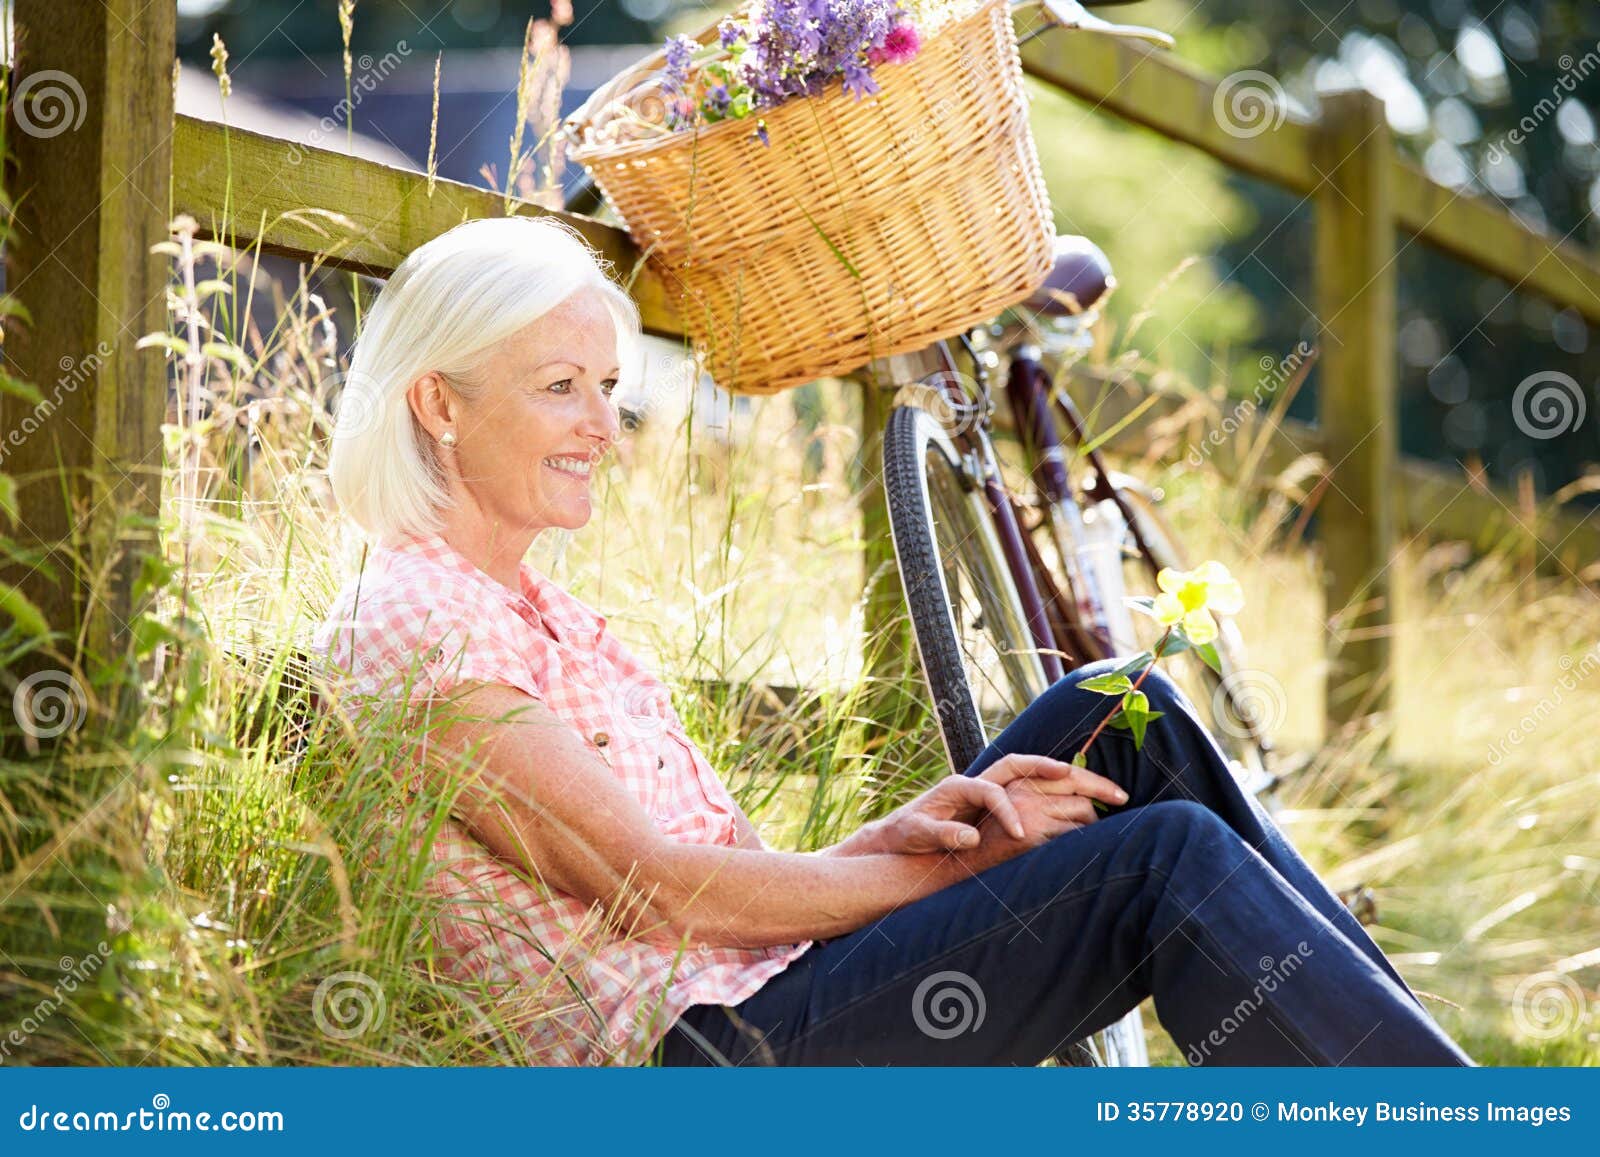 Middle Aged Woman Relaxing on Country Cycle Ride Stock Photo - Image of ...